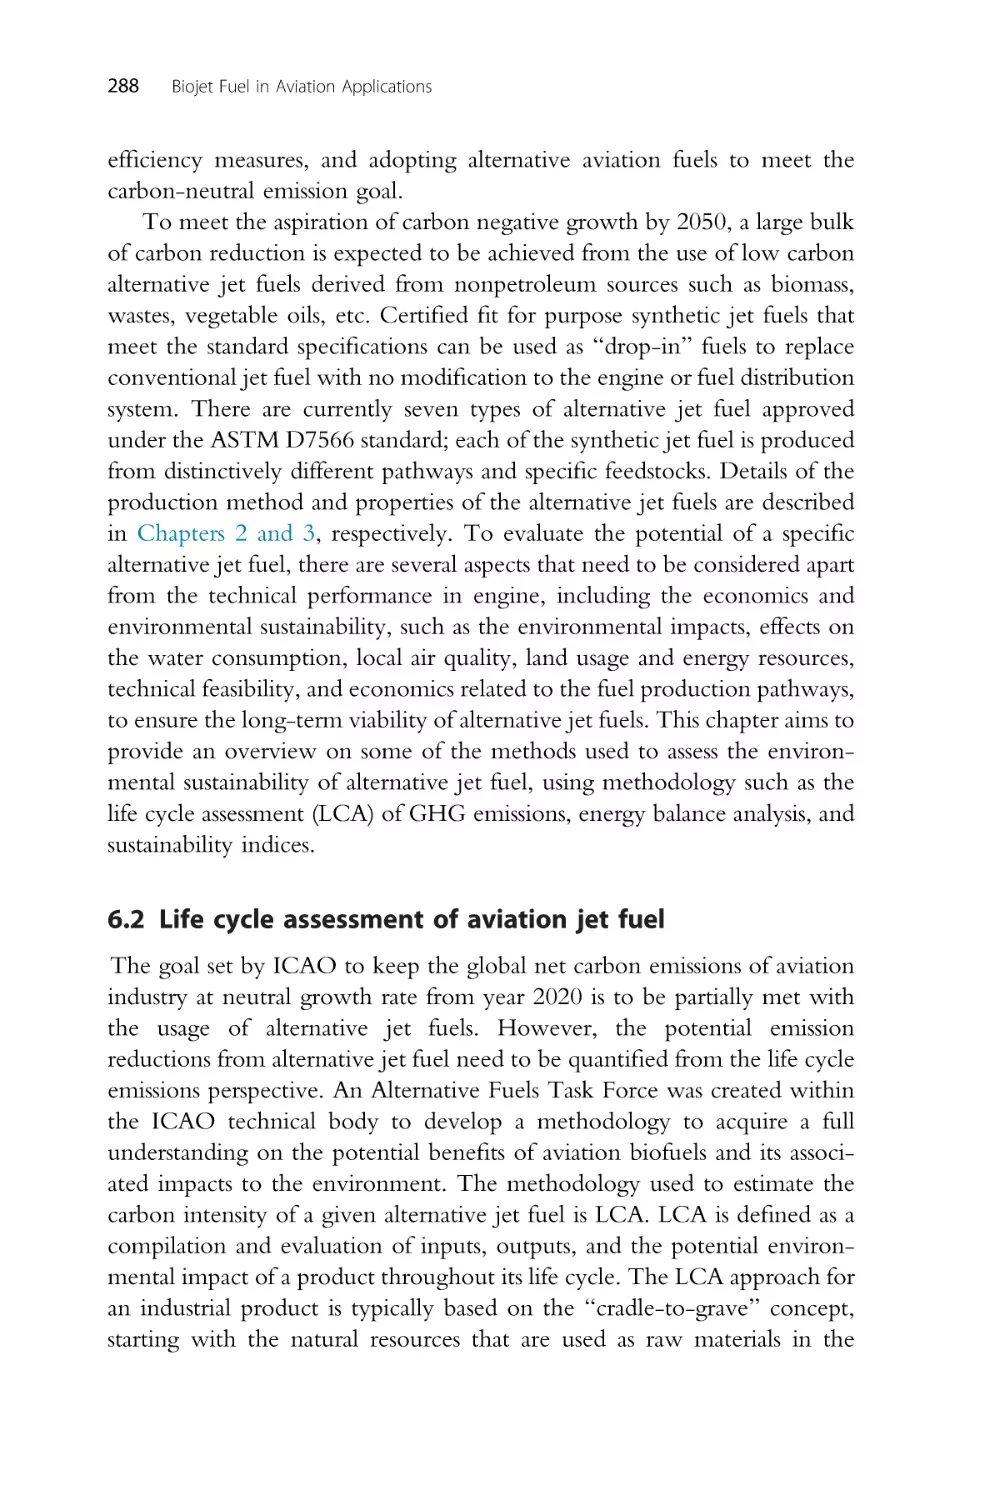 6.2 Life cycle assessment of aviation jet fuel